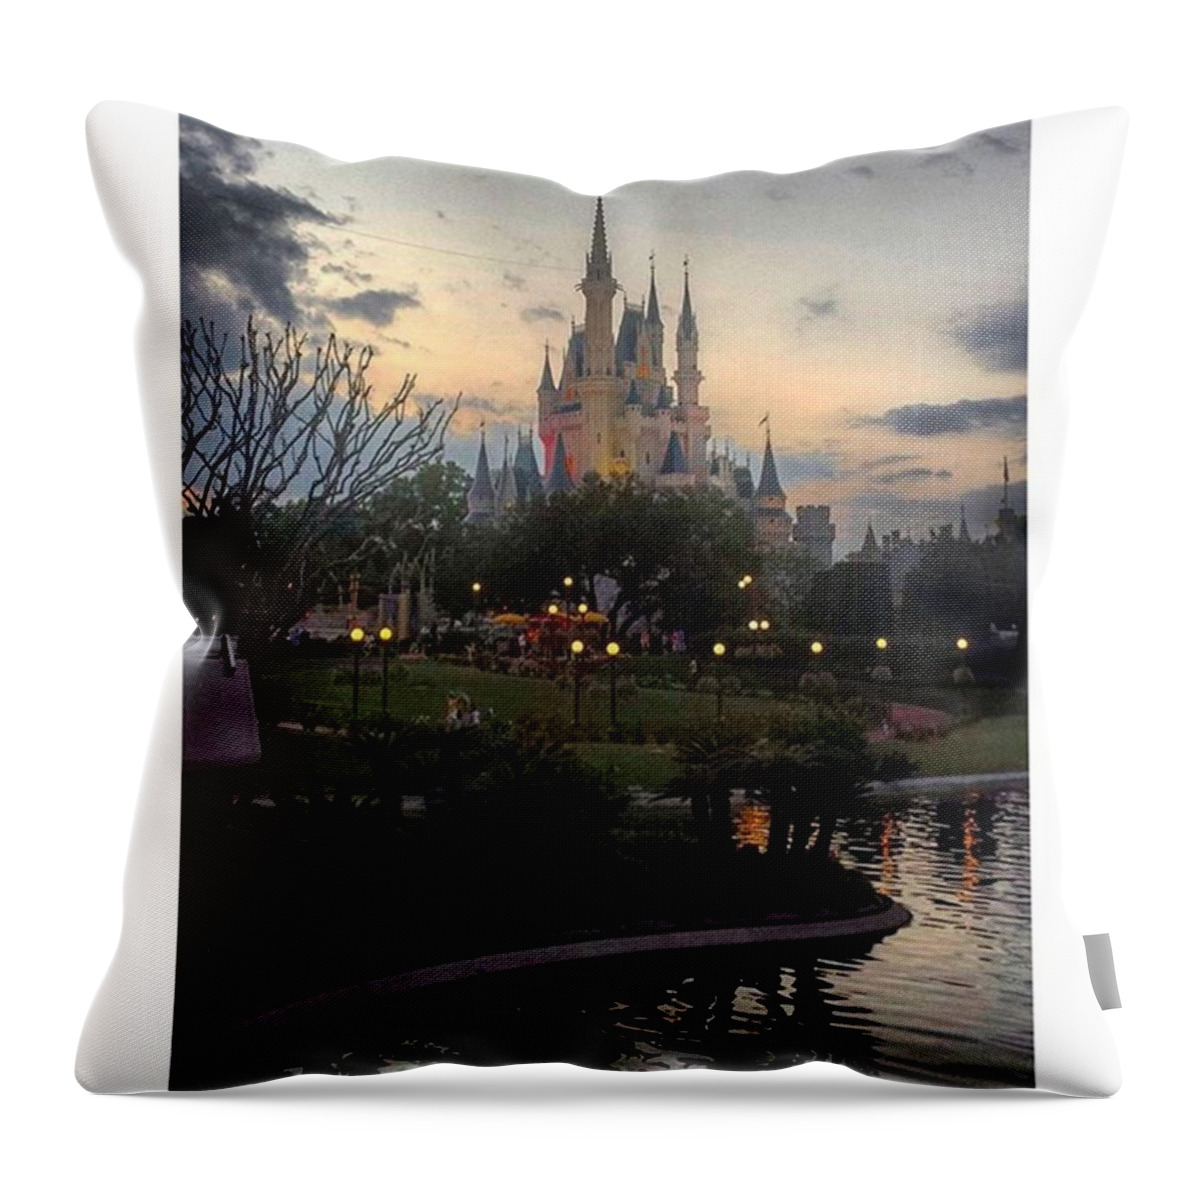 Scenery Throw Pillow featuring the photograph Cinderella's Castle by Janel Cortez